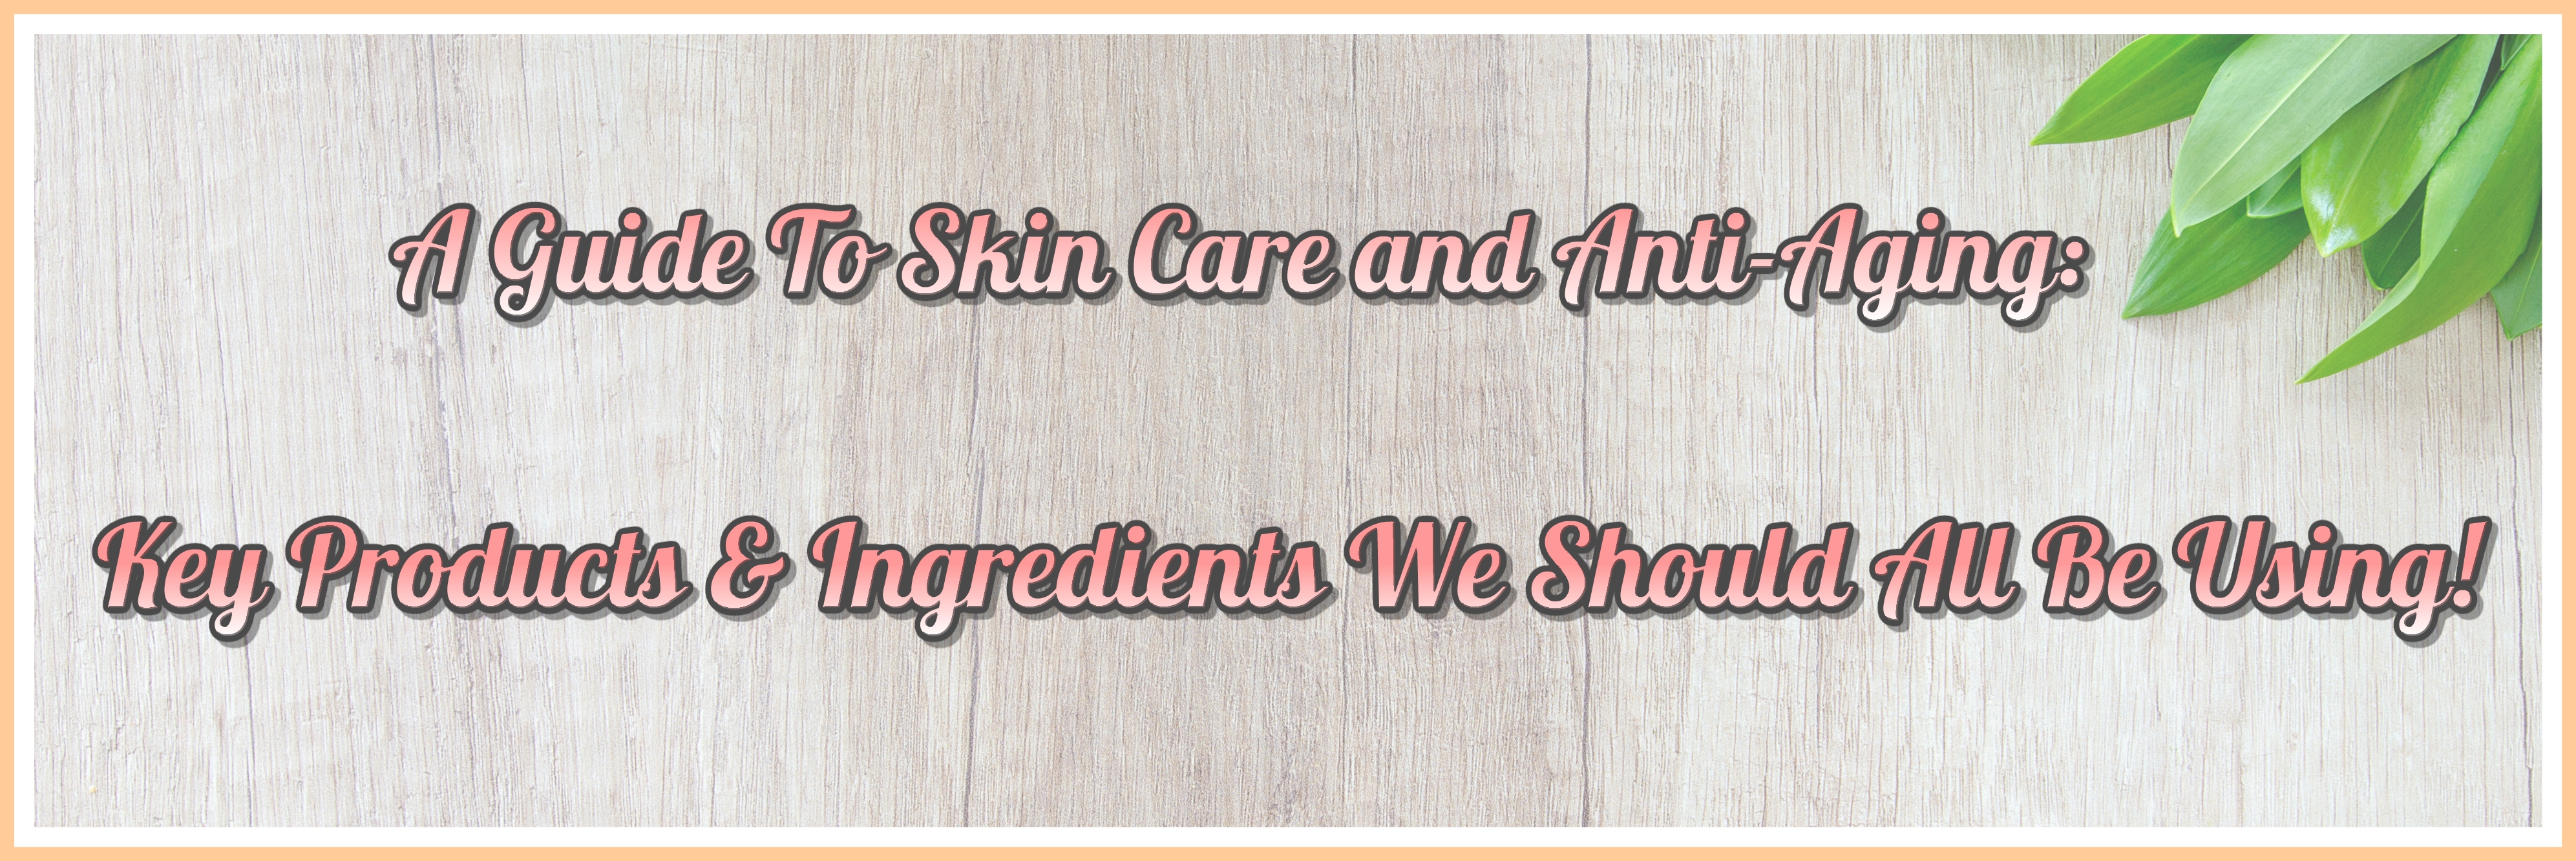 Skincare tips, Best Skincare Products, Skin Care Advice, Best Skin Care Ingredients, Skin Care Regimen